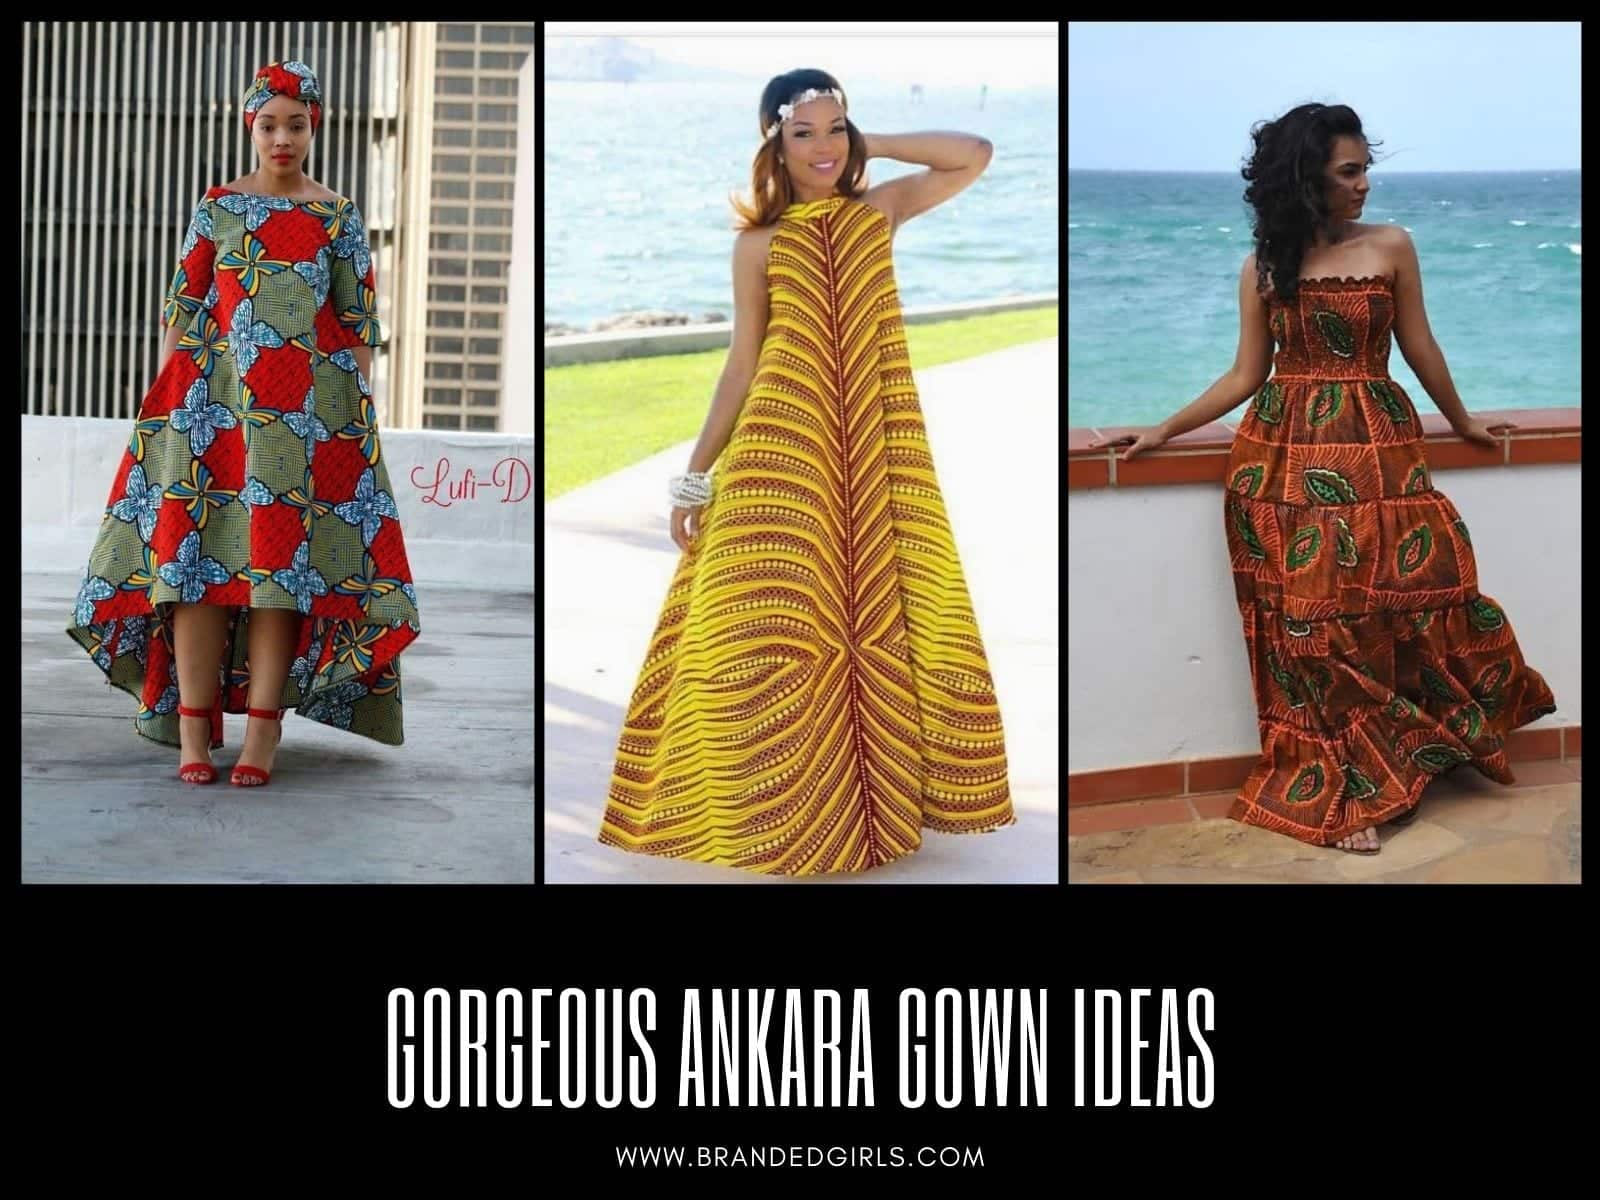 Latest Kampala Gown Styles for Ladies in 2022 and 2023 - Kaybee Fashion  Styles